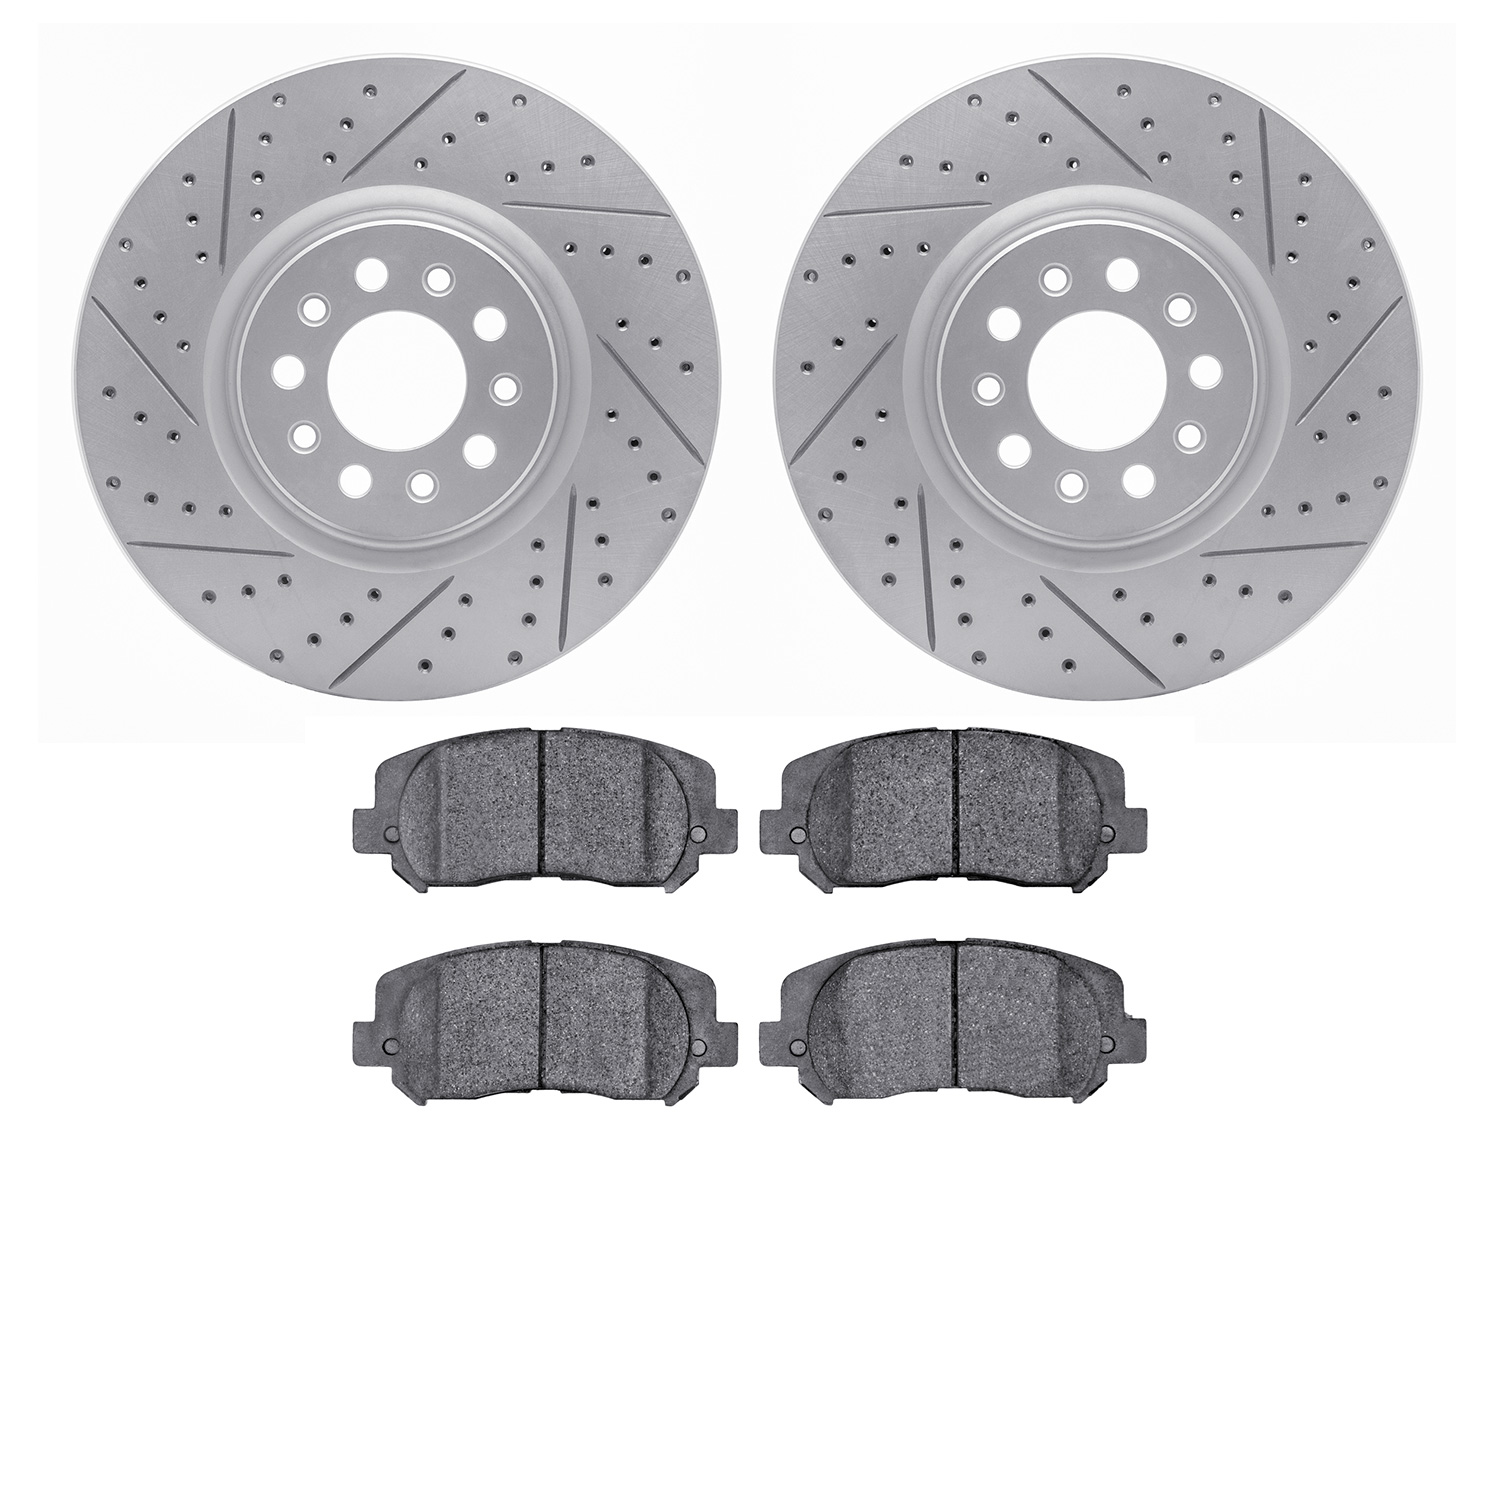 2502-42042 Geoperformance Drilled/Slotted Rotors w/5000 Advanced Brake Pads Kit, Fits Select Mopar, Position: Front